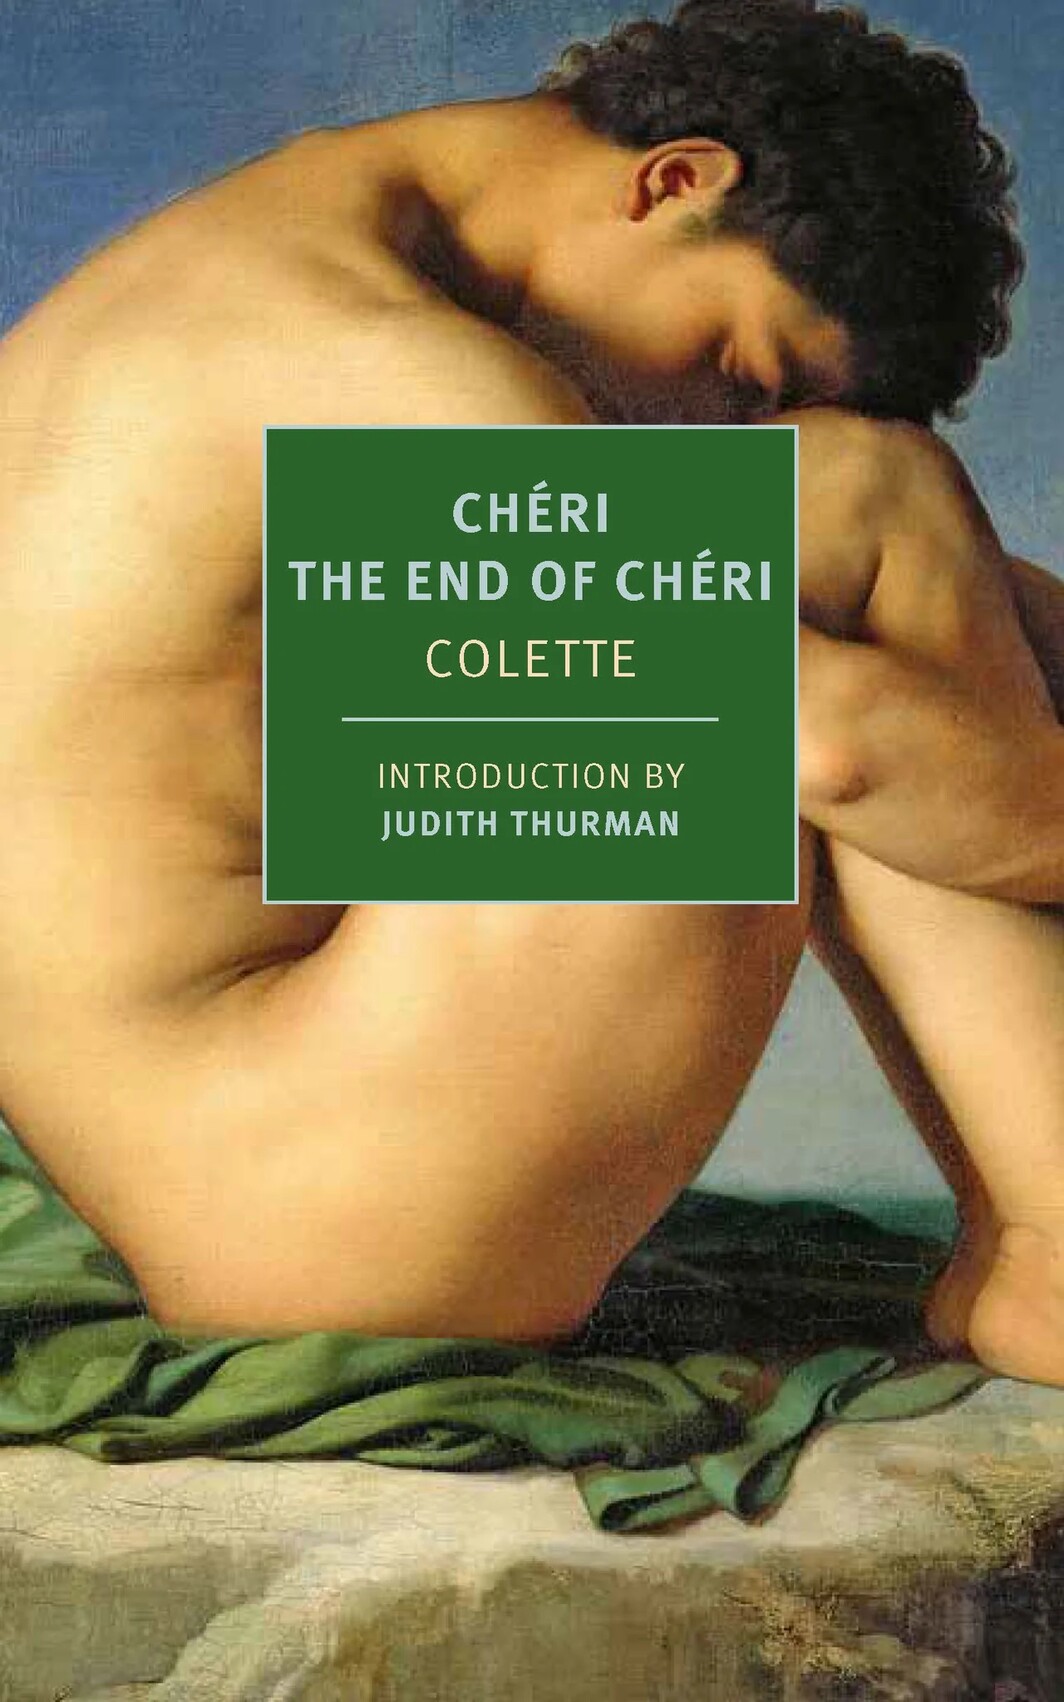 The cover of Chéri and The End of Chéri